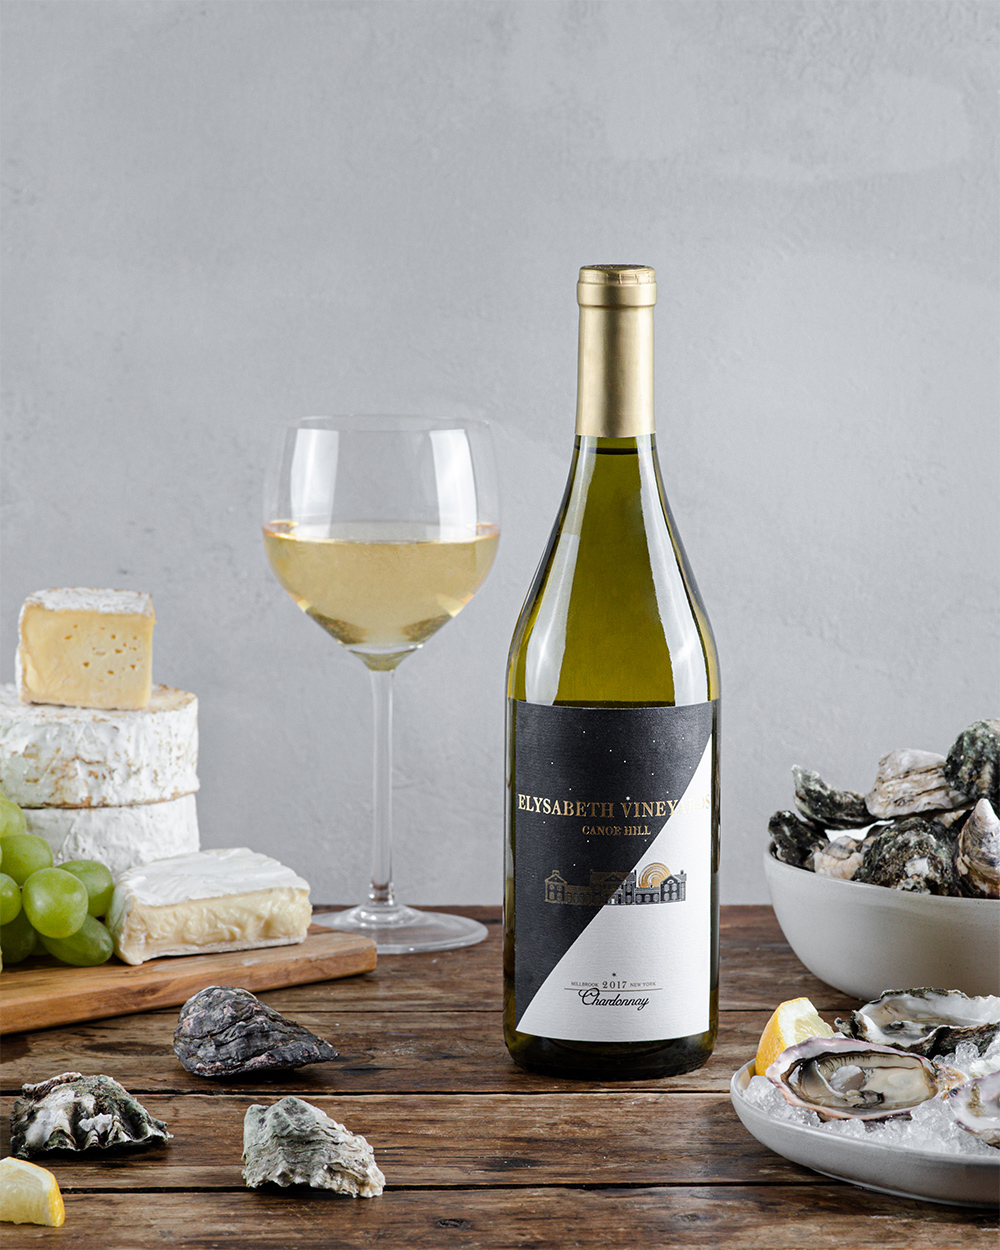 Chardonnay bottle with half full wine glass, surrounded by brie cheese, clams, oysters, and green grapes.